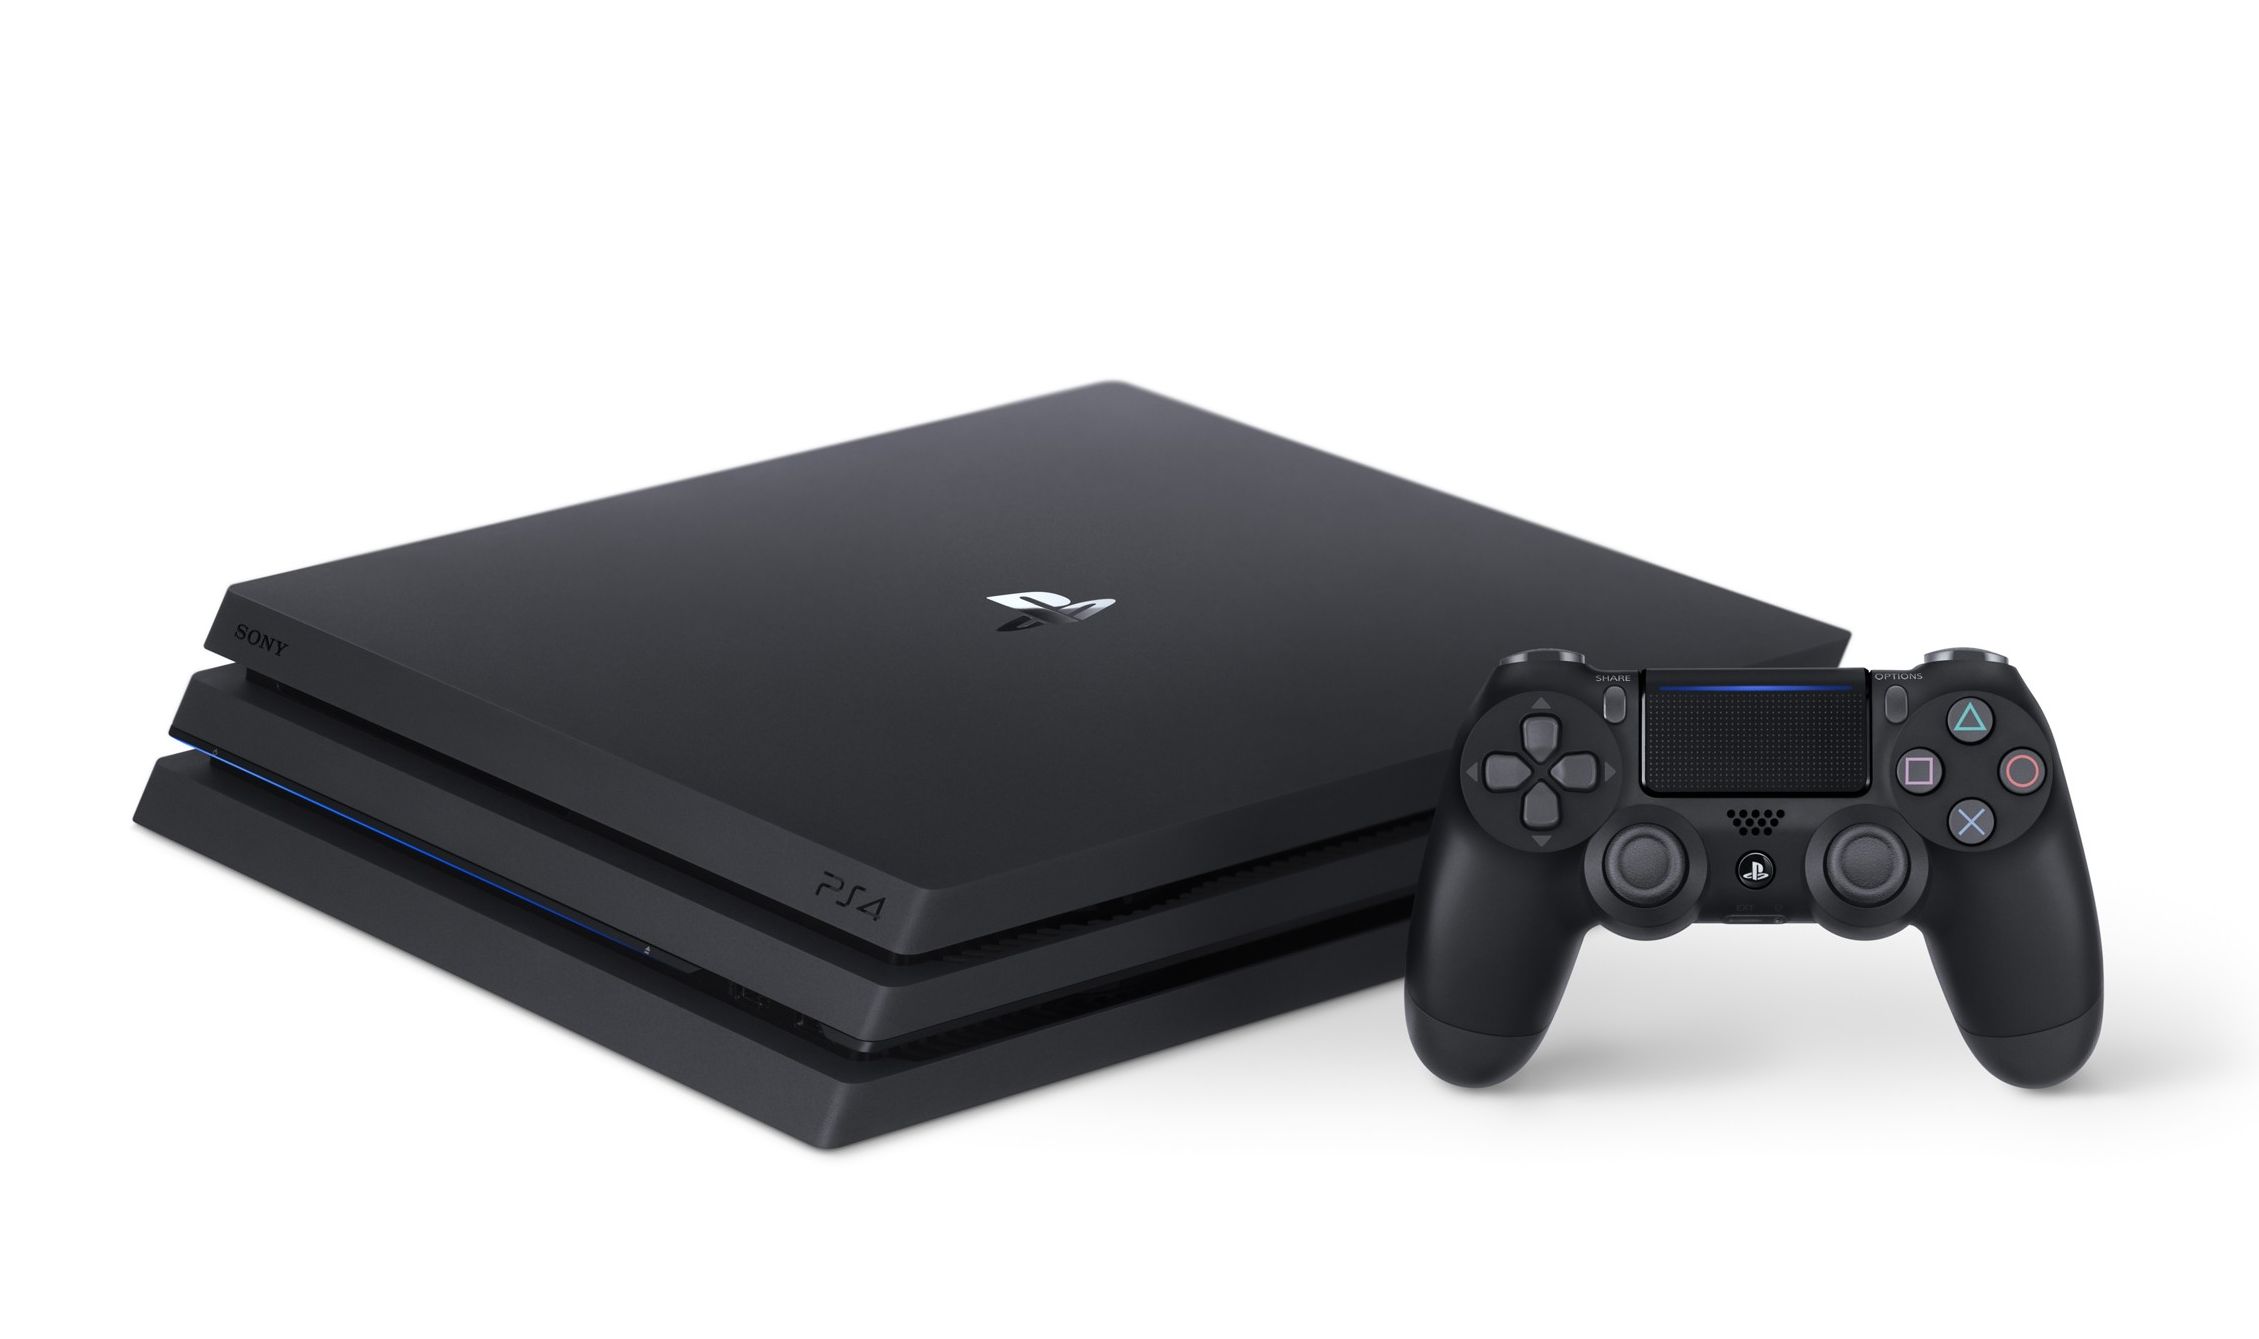 playstation 4 pro shown in a promotional image from sony with a controller